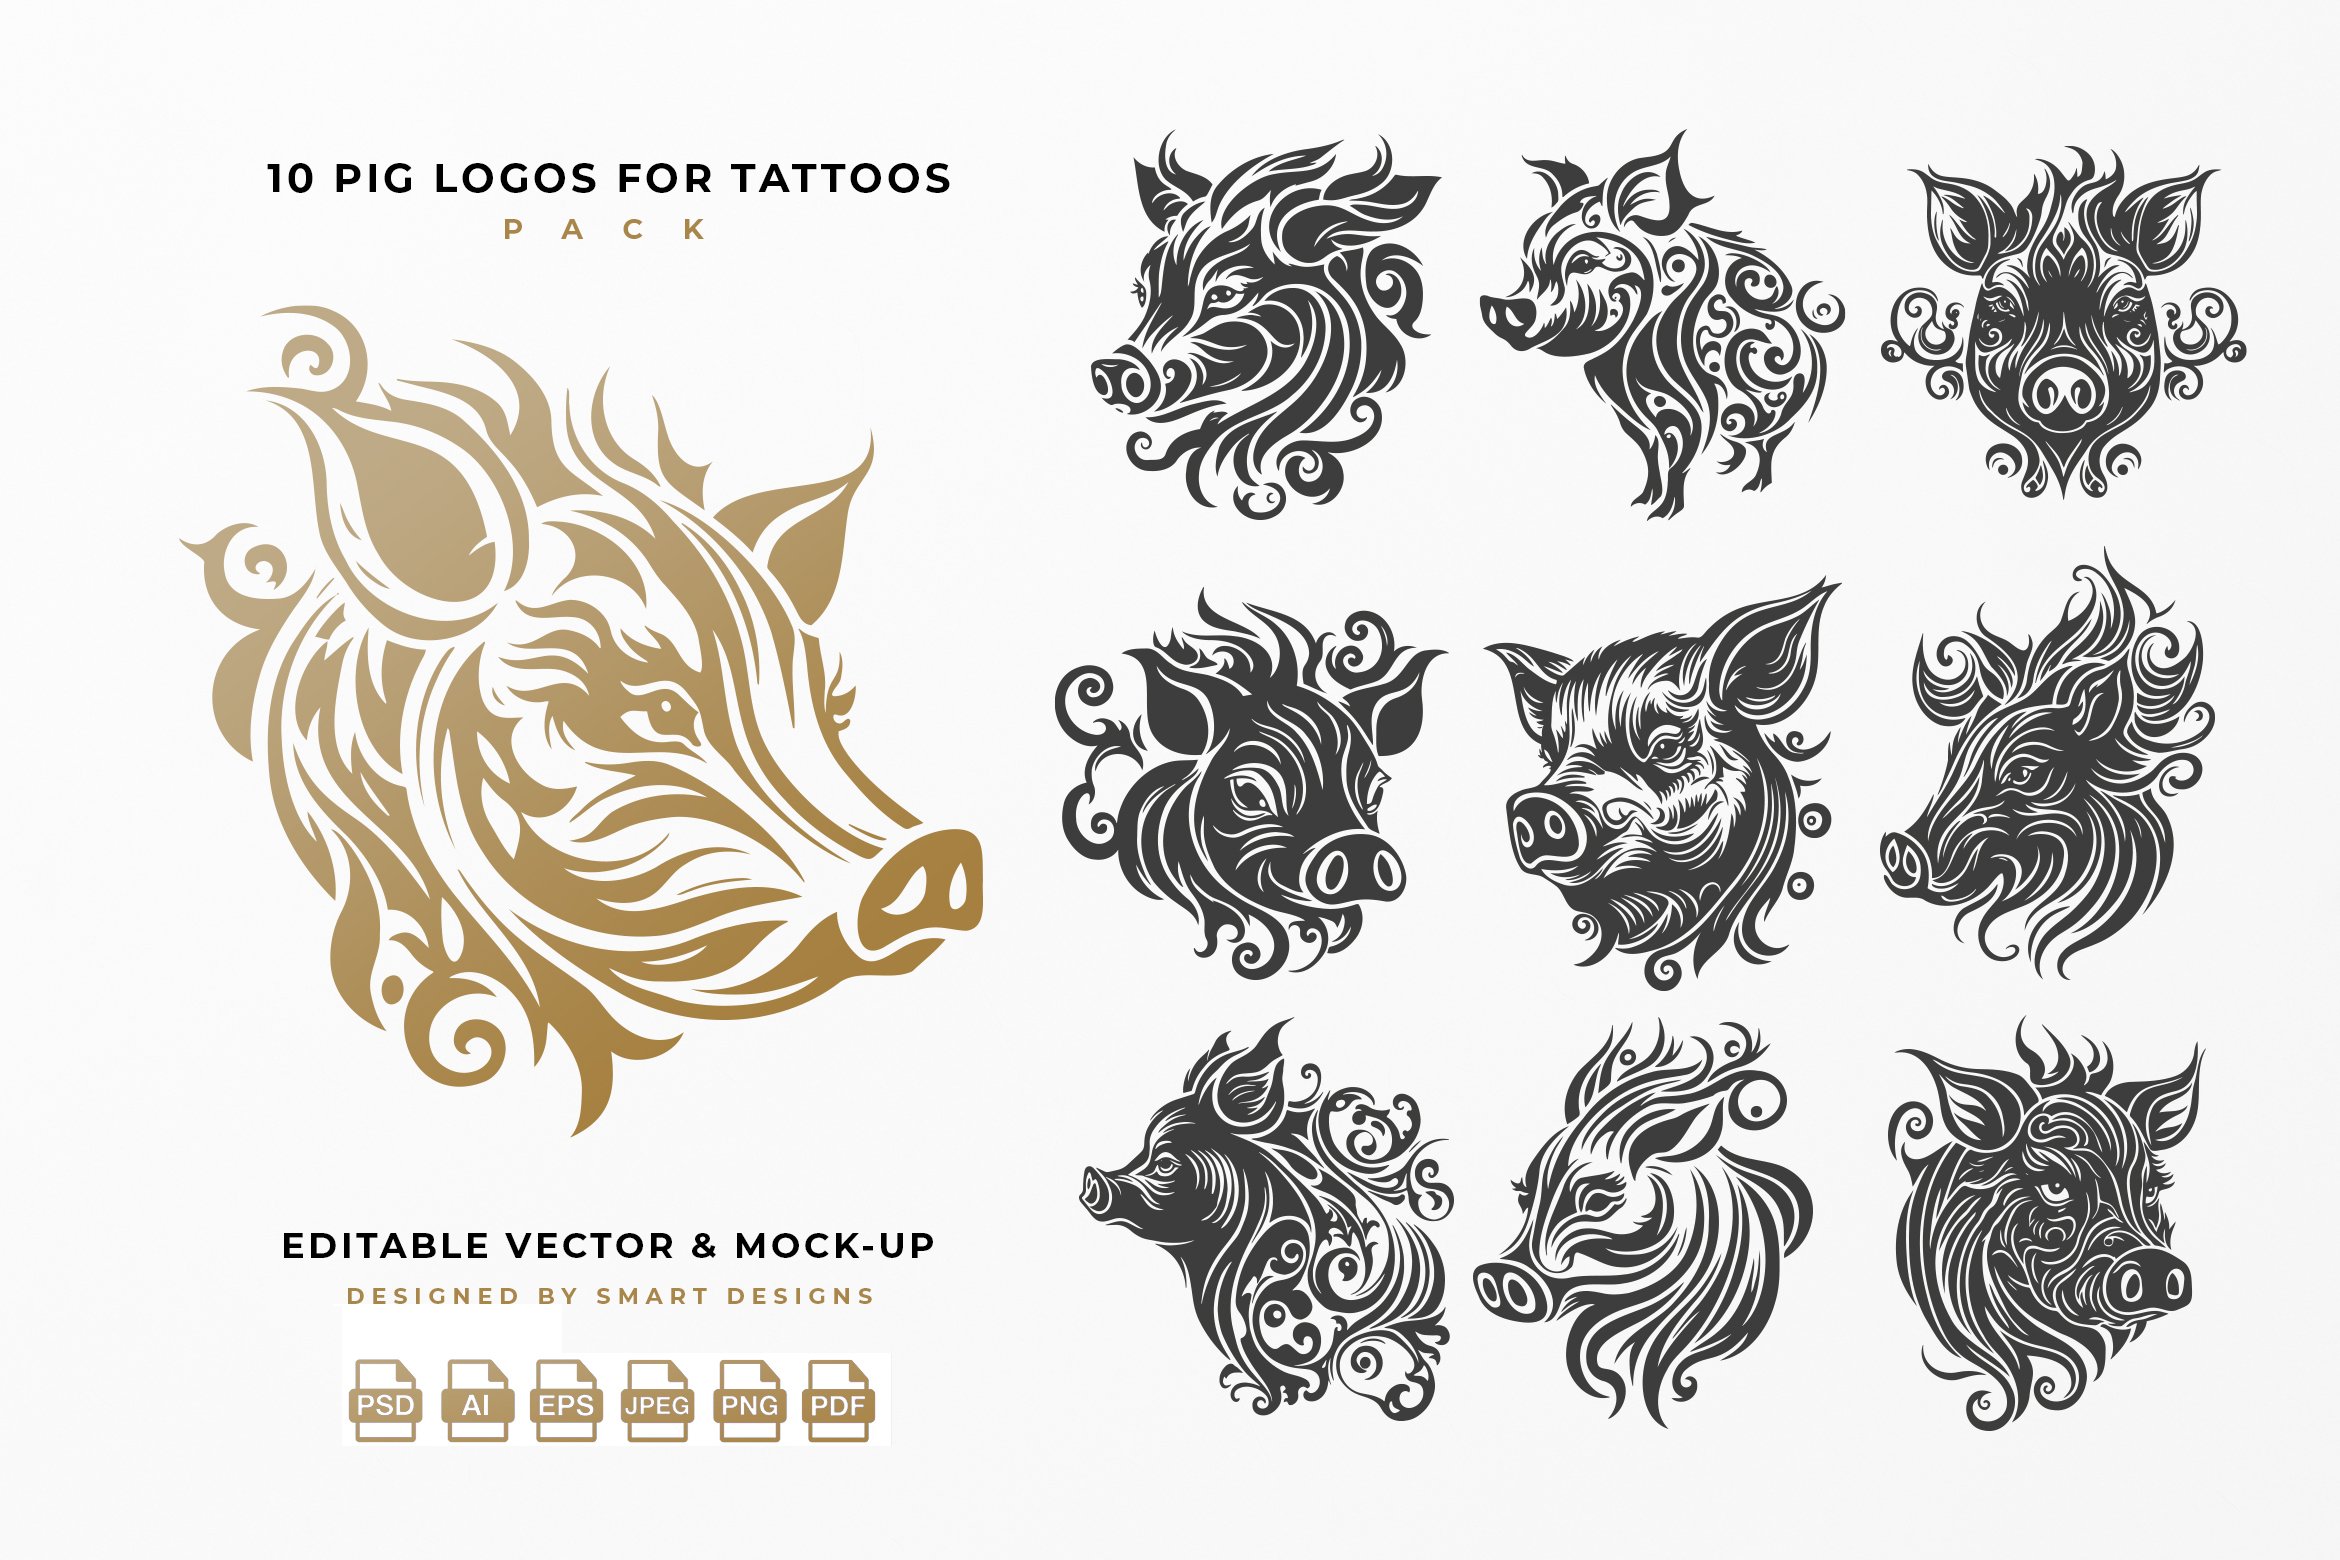 pig logos for tattoos pack x10 313